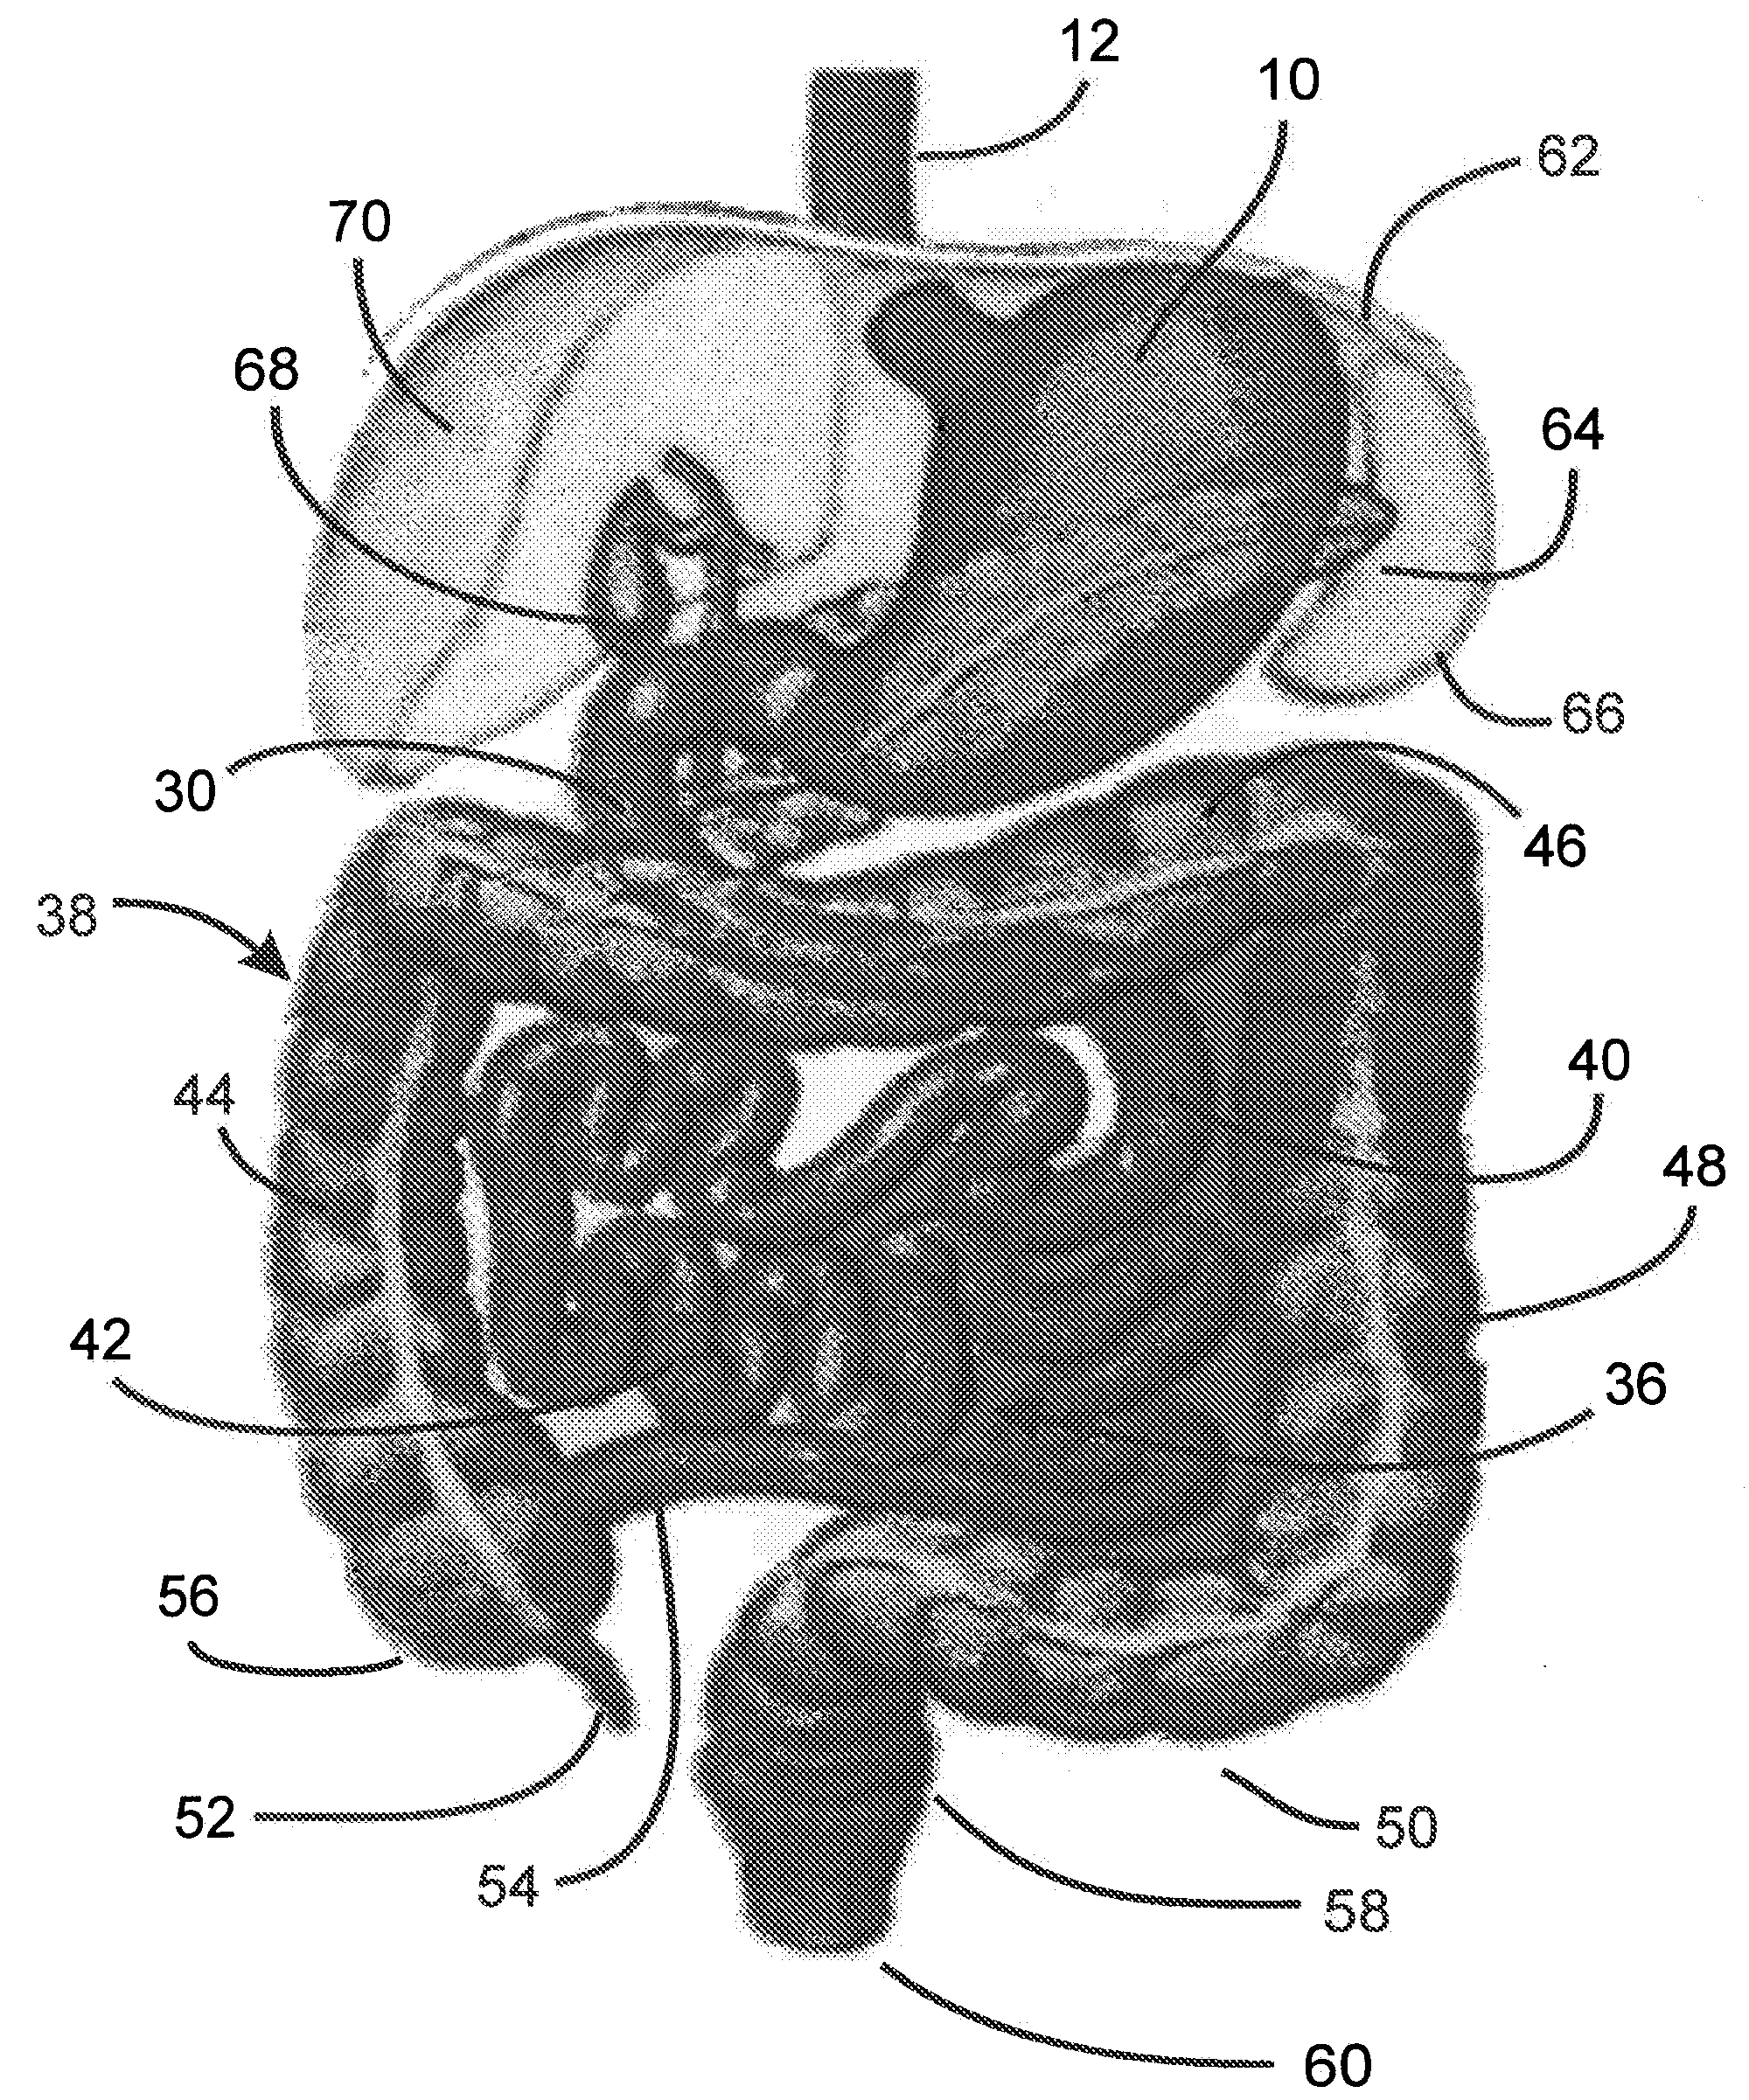 Process for electrostimulation treatment of morbid obesity